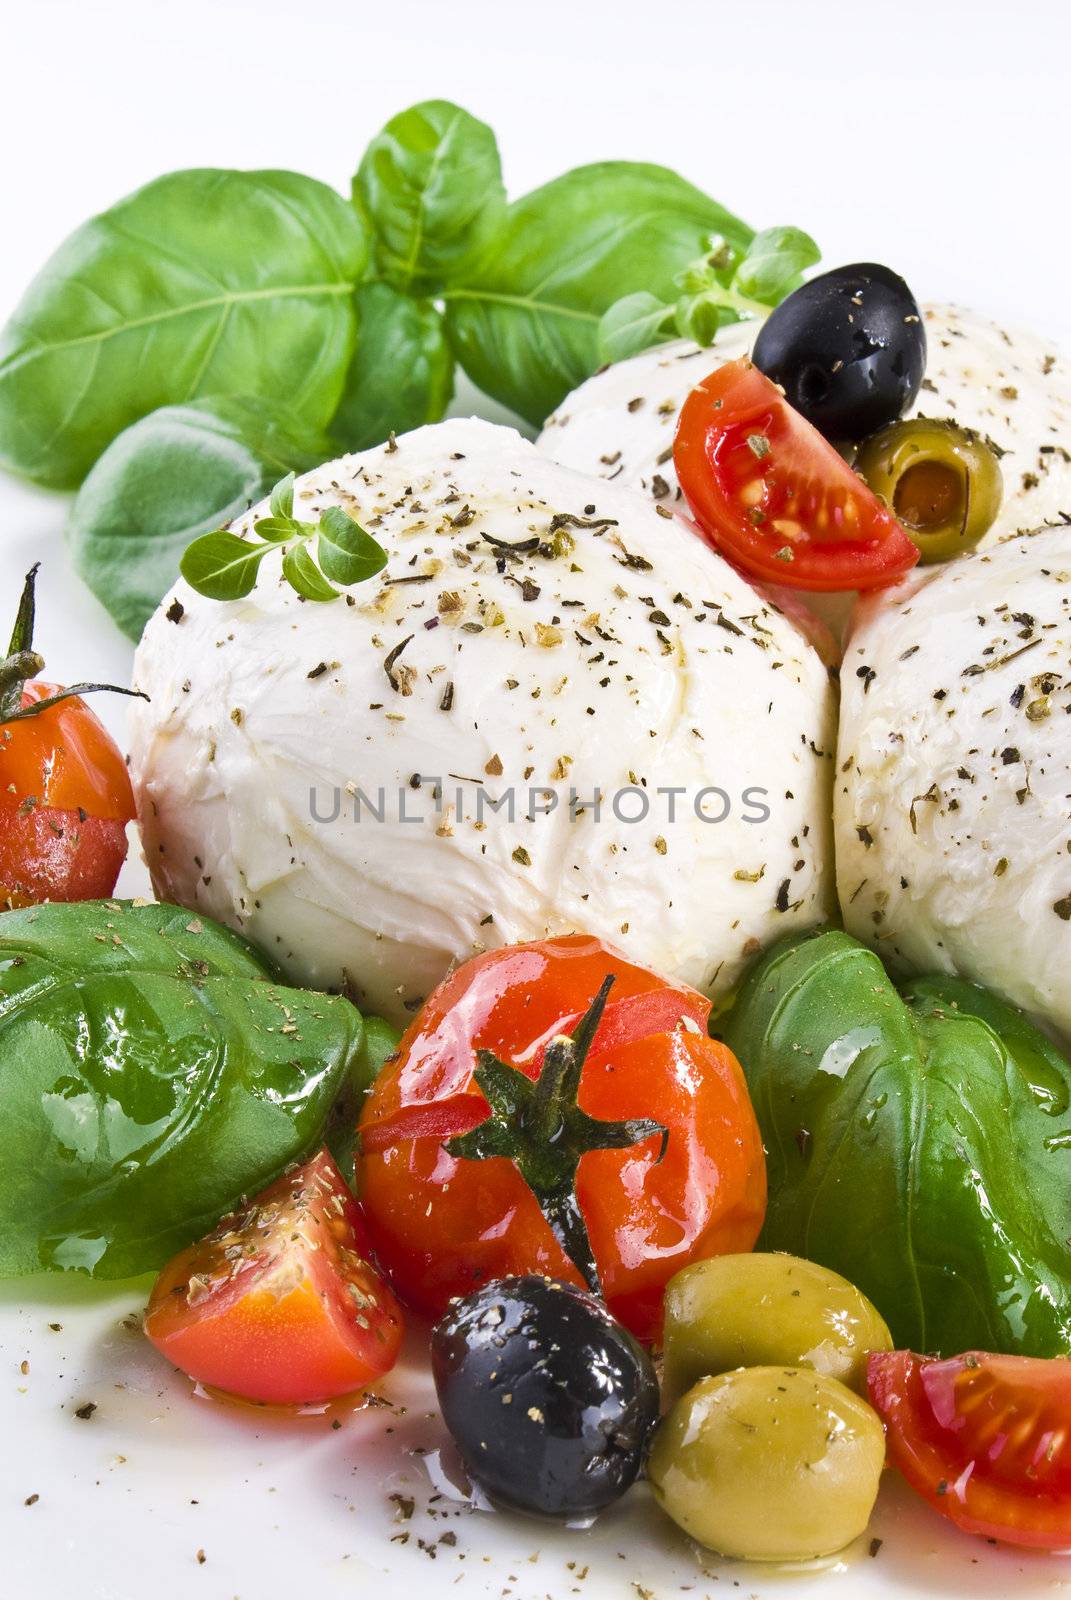 Mozzarella with basil cherry tomatoes and olives by caldix